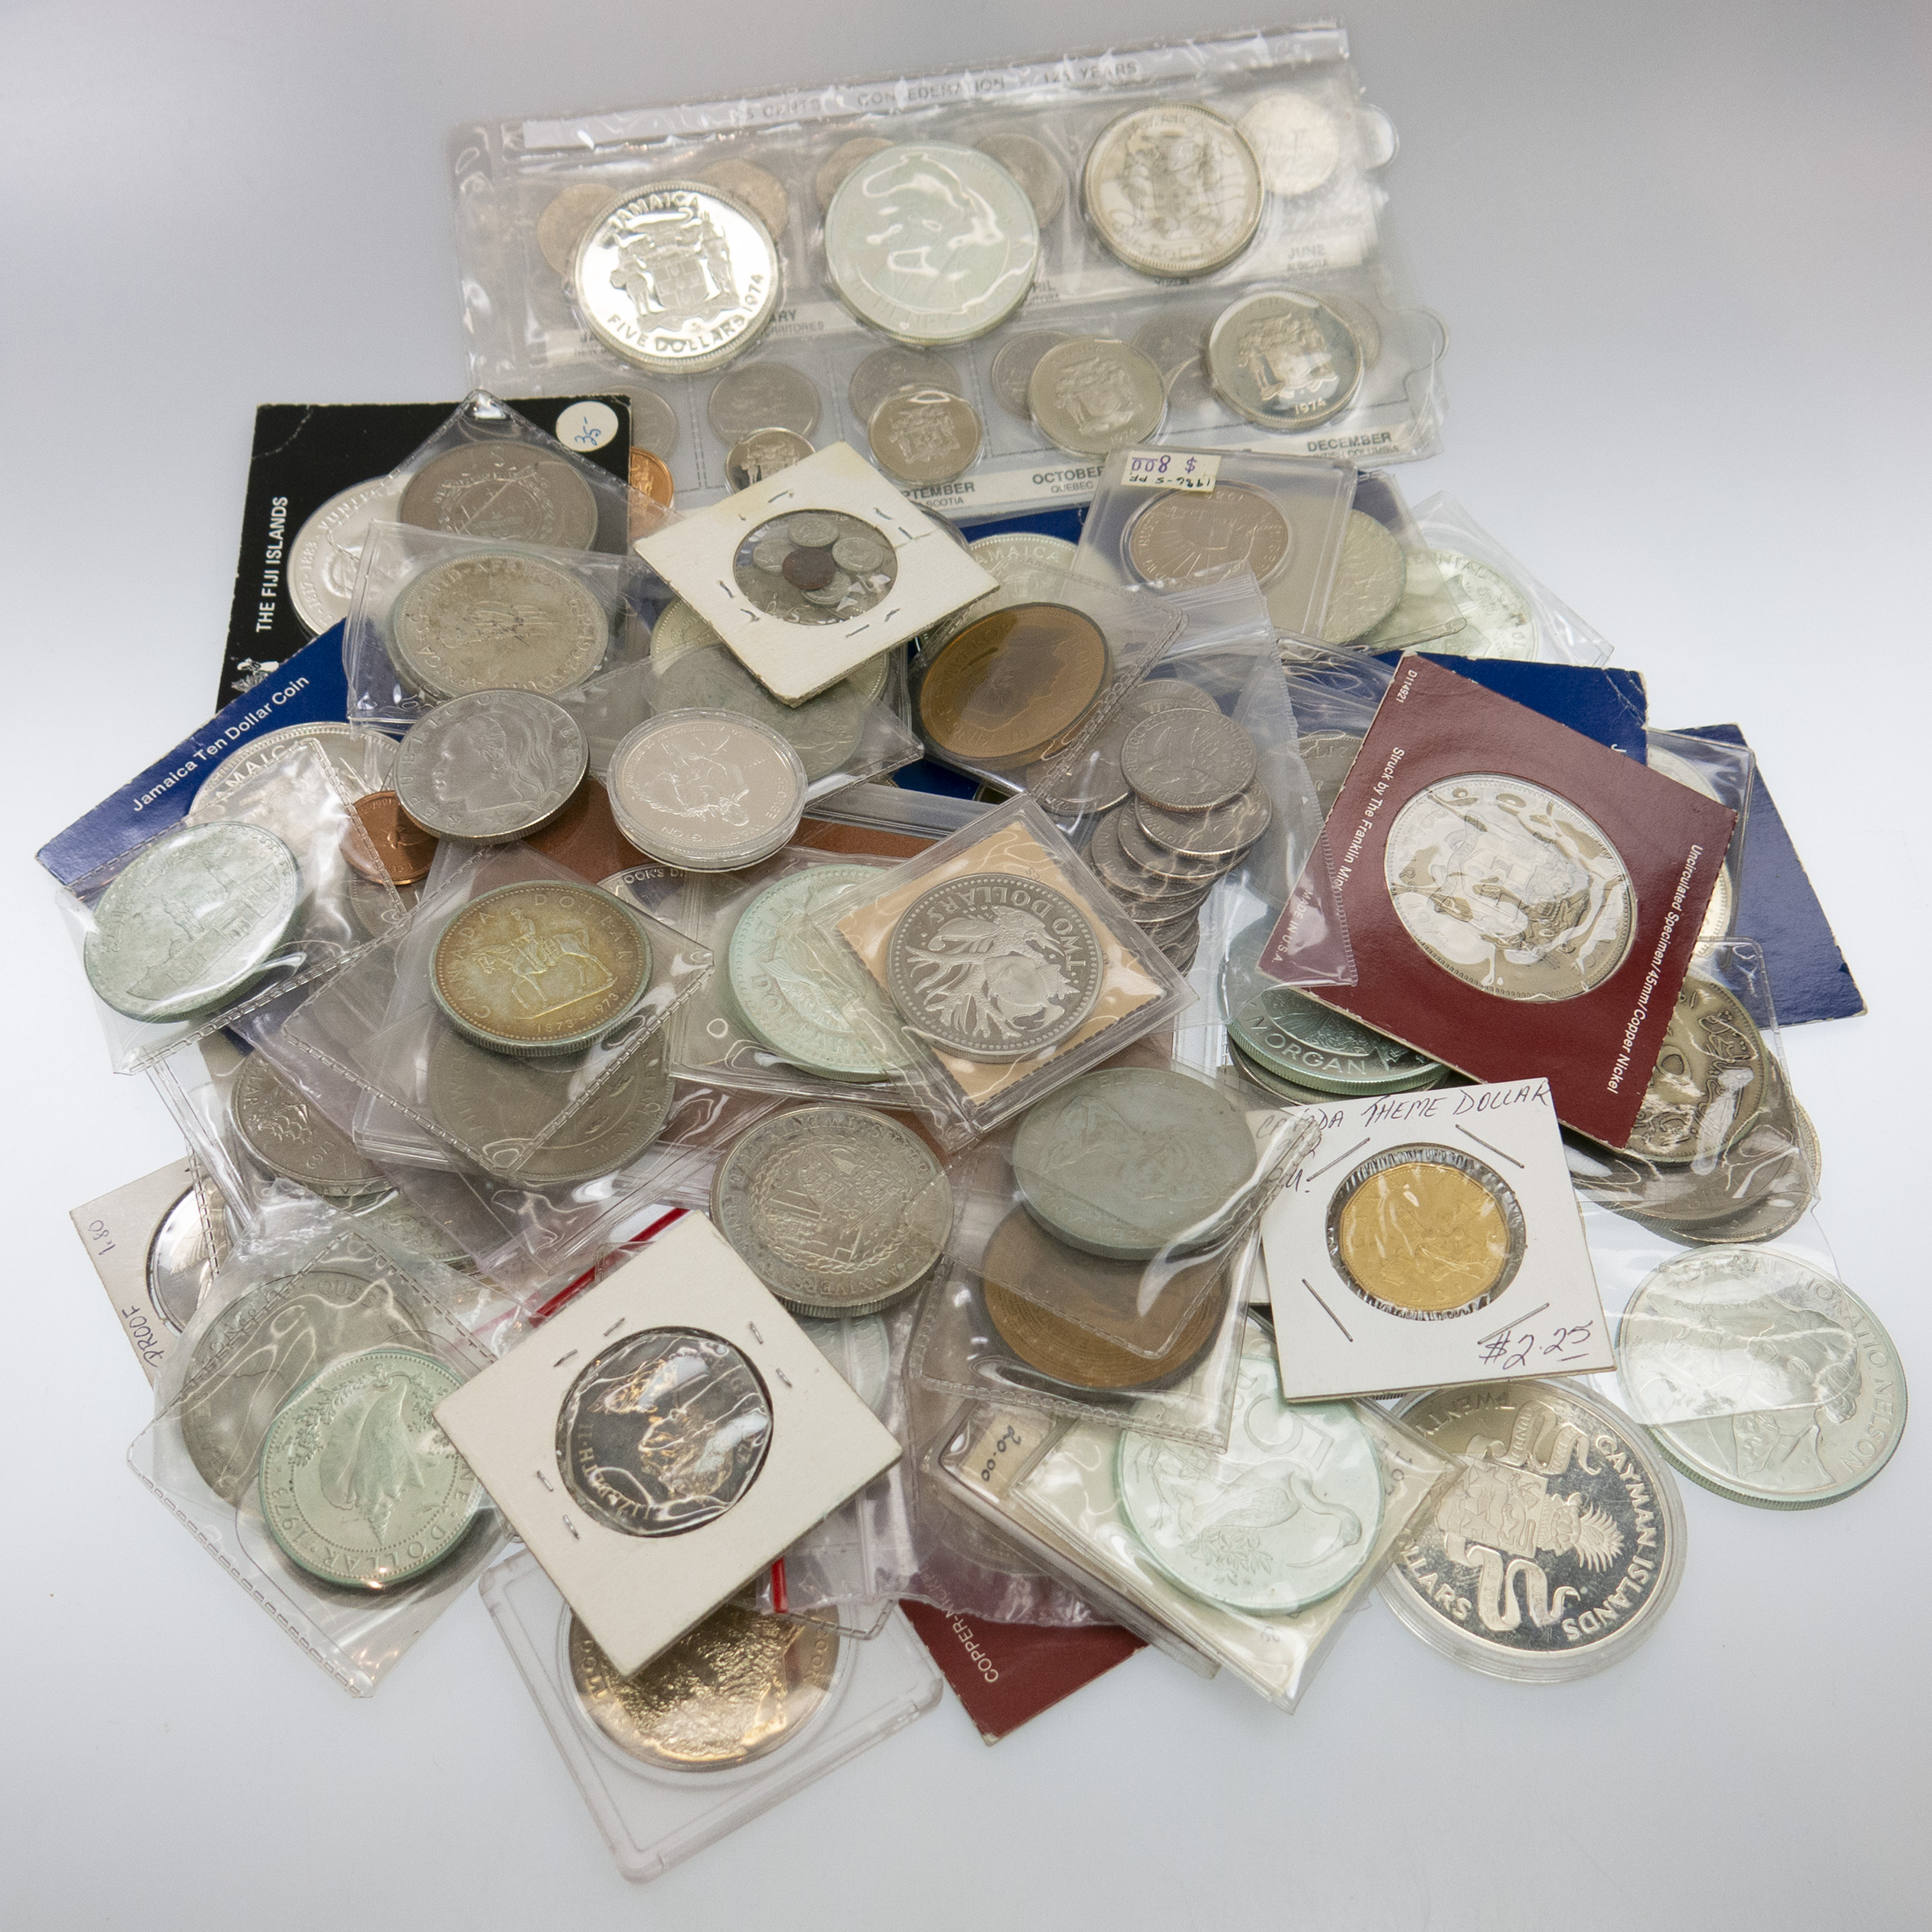 Quantity Of Canadian & Foreign Silver And Metal Coins And Coin Sets